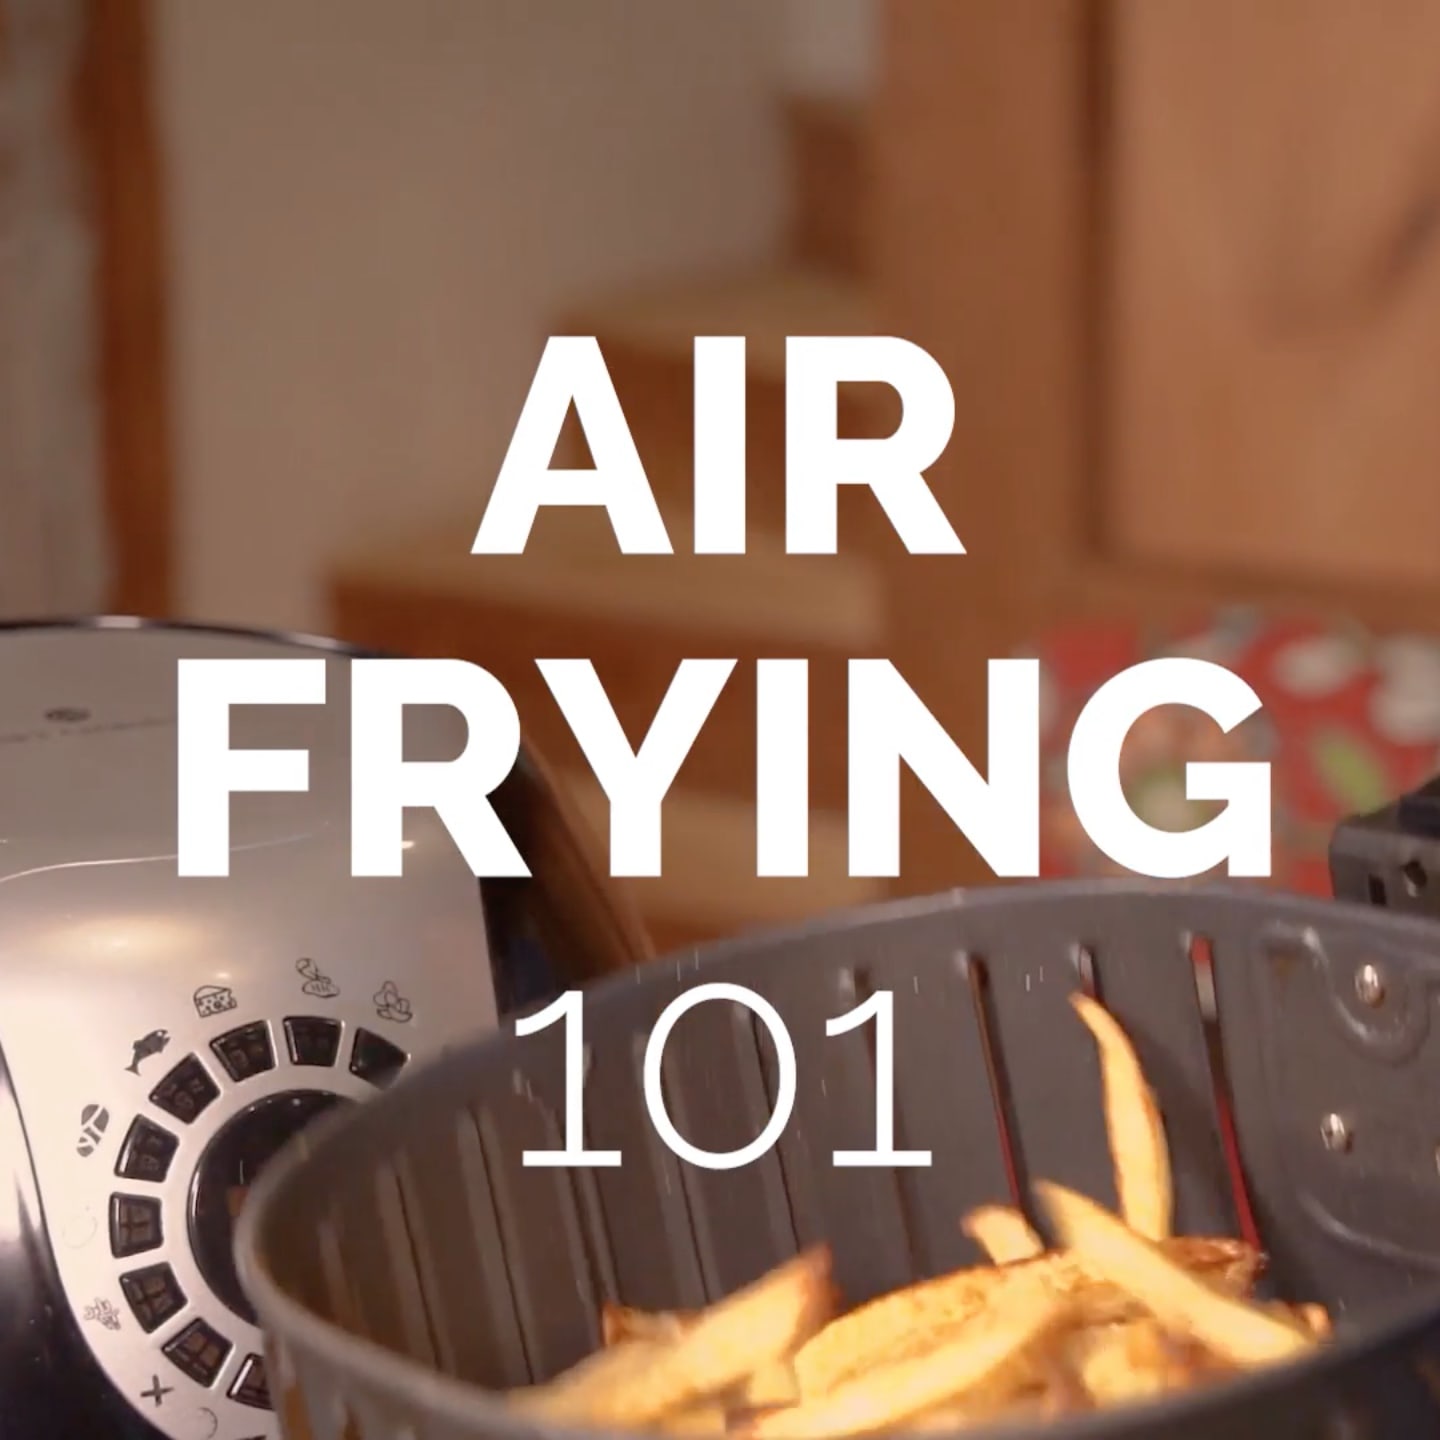 How to Choose an Air Fryer  Blue Jean Chef - Meredith Laurence